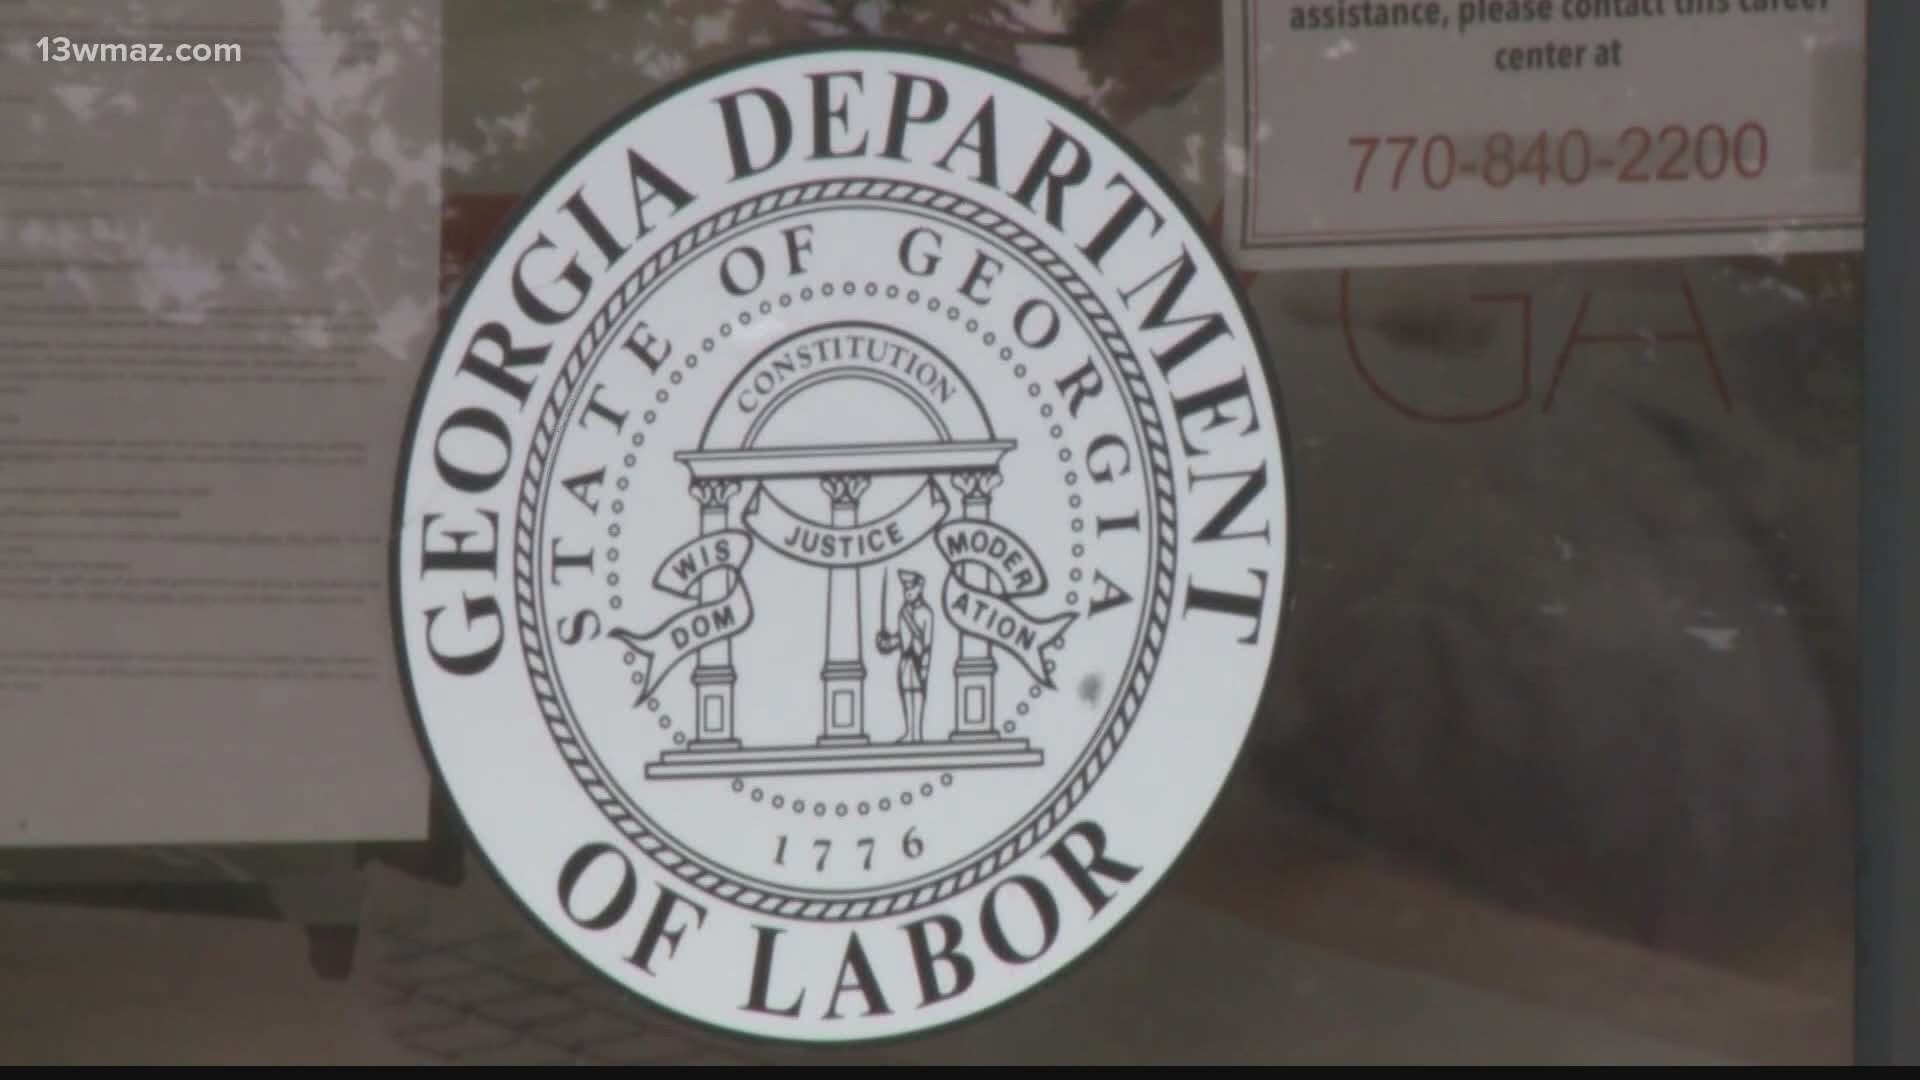 Soon, a new unemployment grant will kick in that will provide an $300 a week for Georgians who are unemployed due to COVID-19.